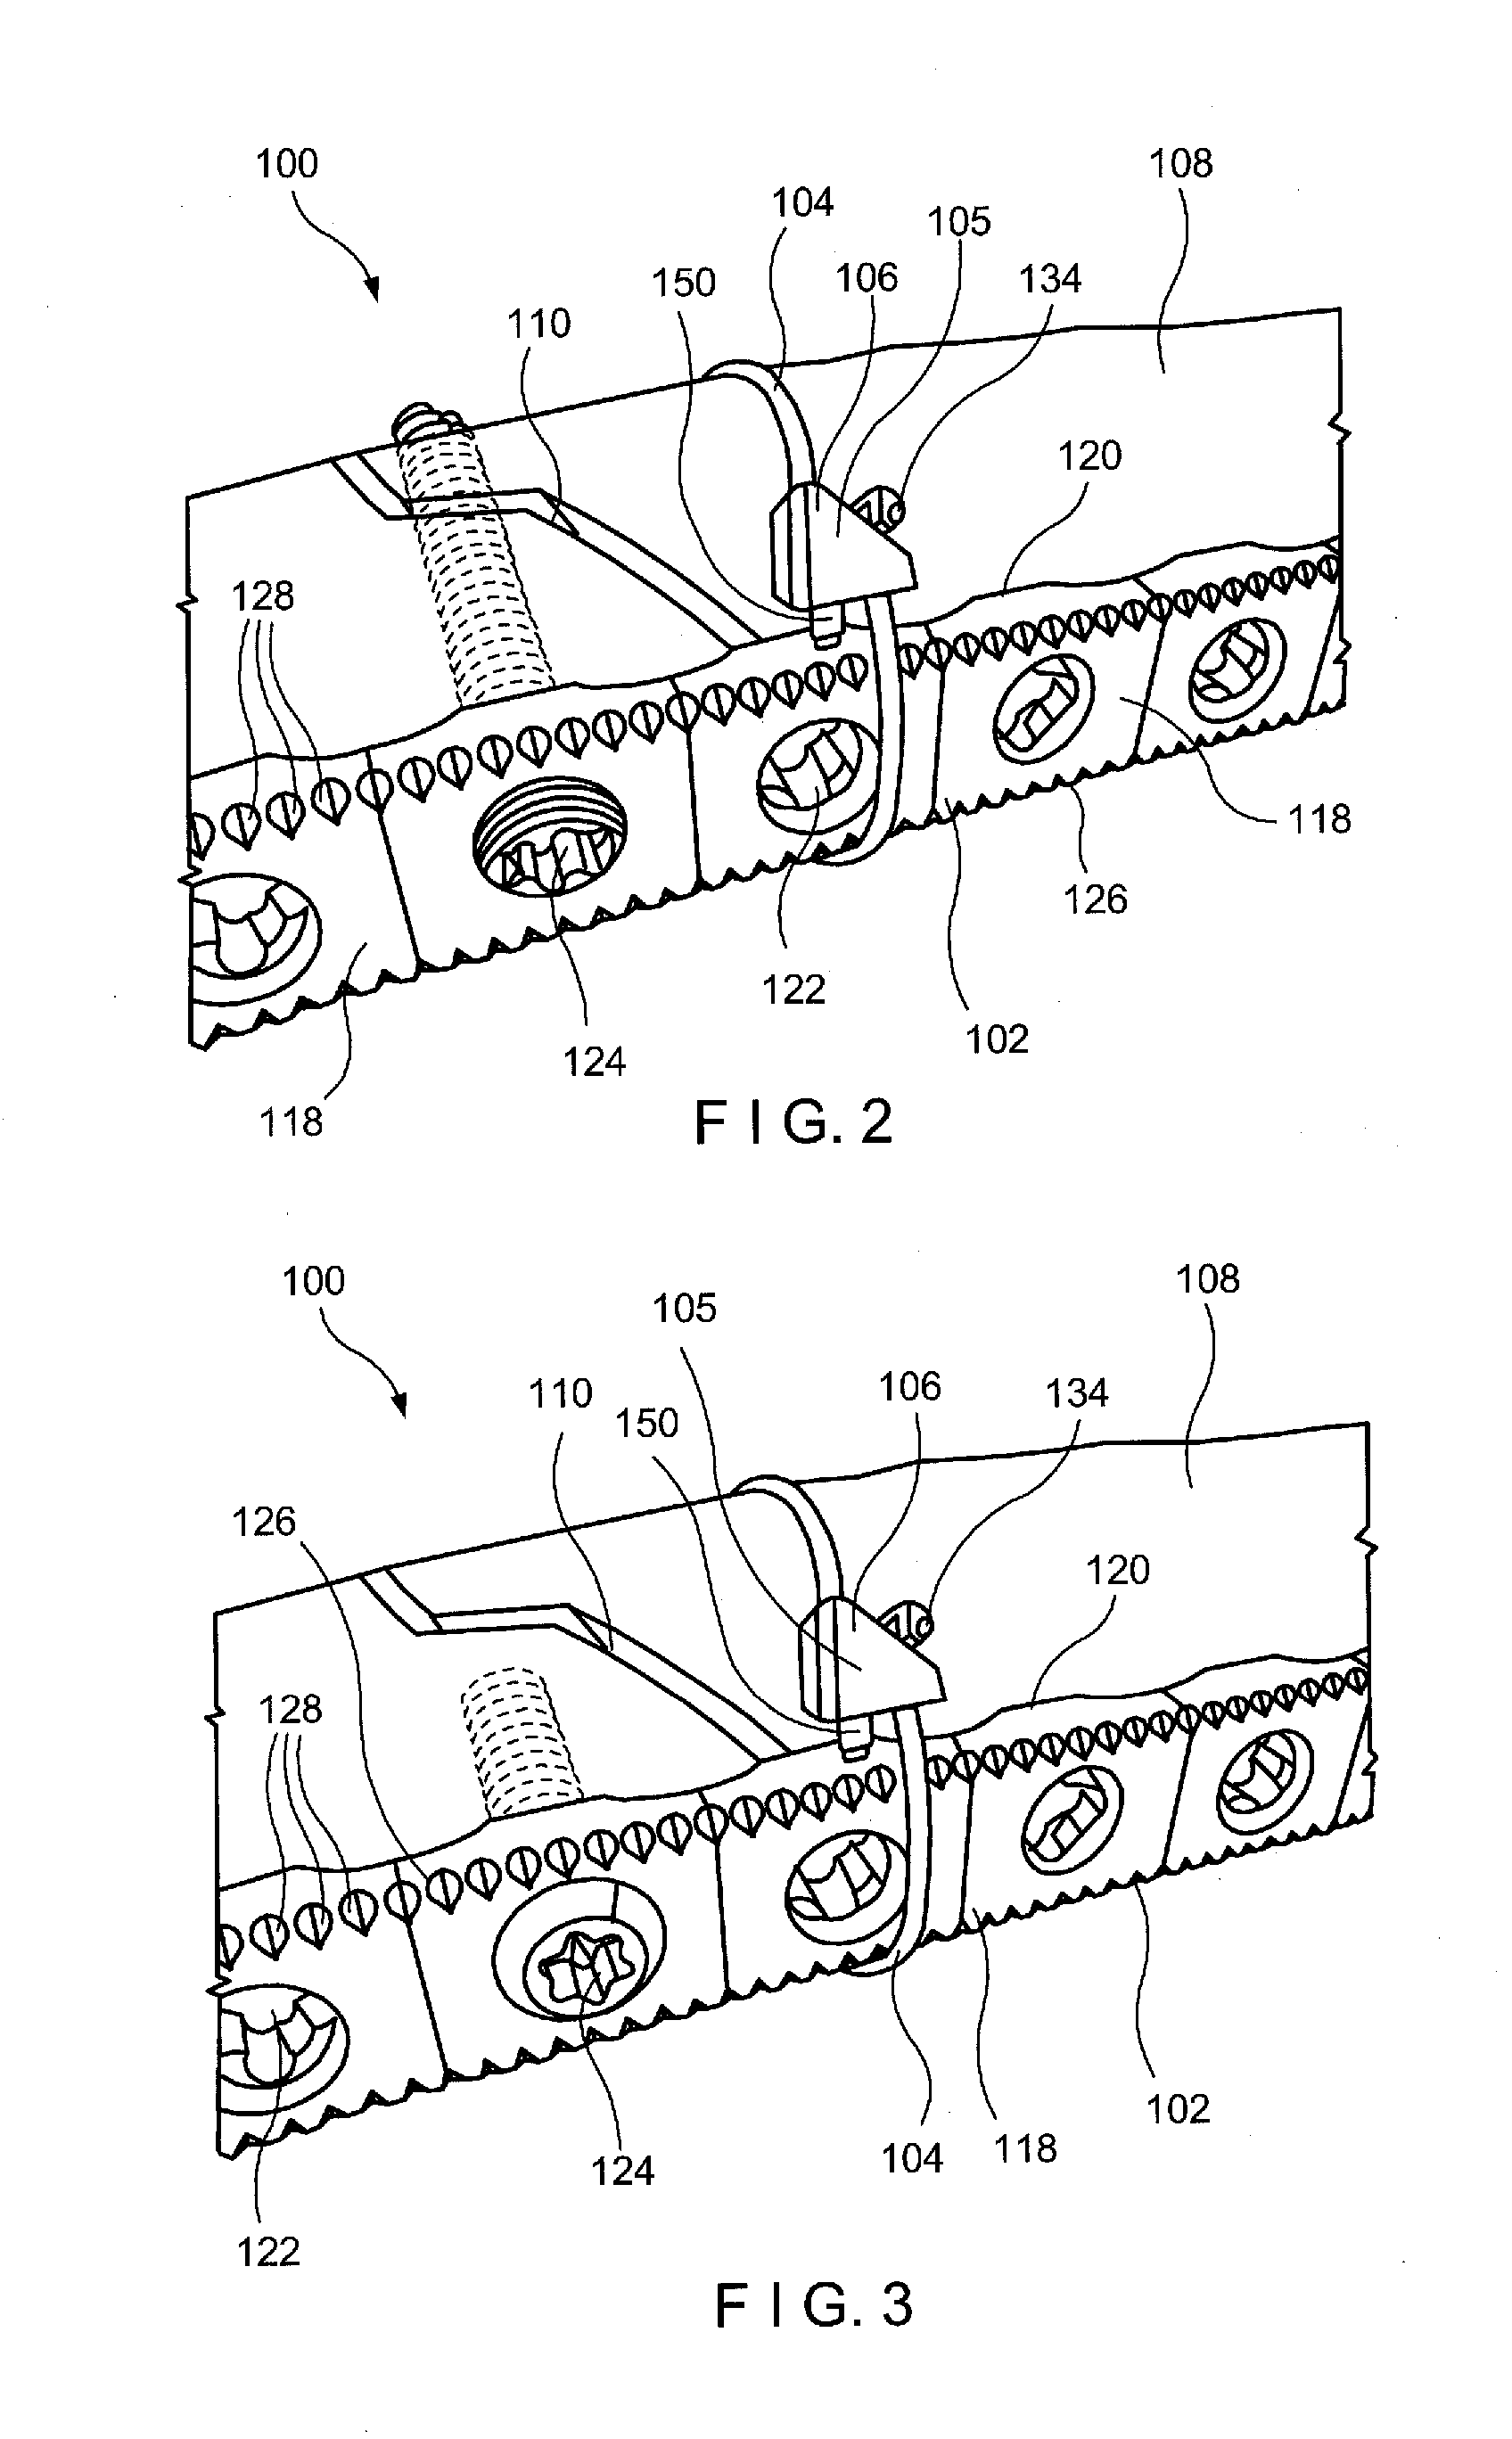 Minimally Invasive Implant and Crimping System